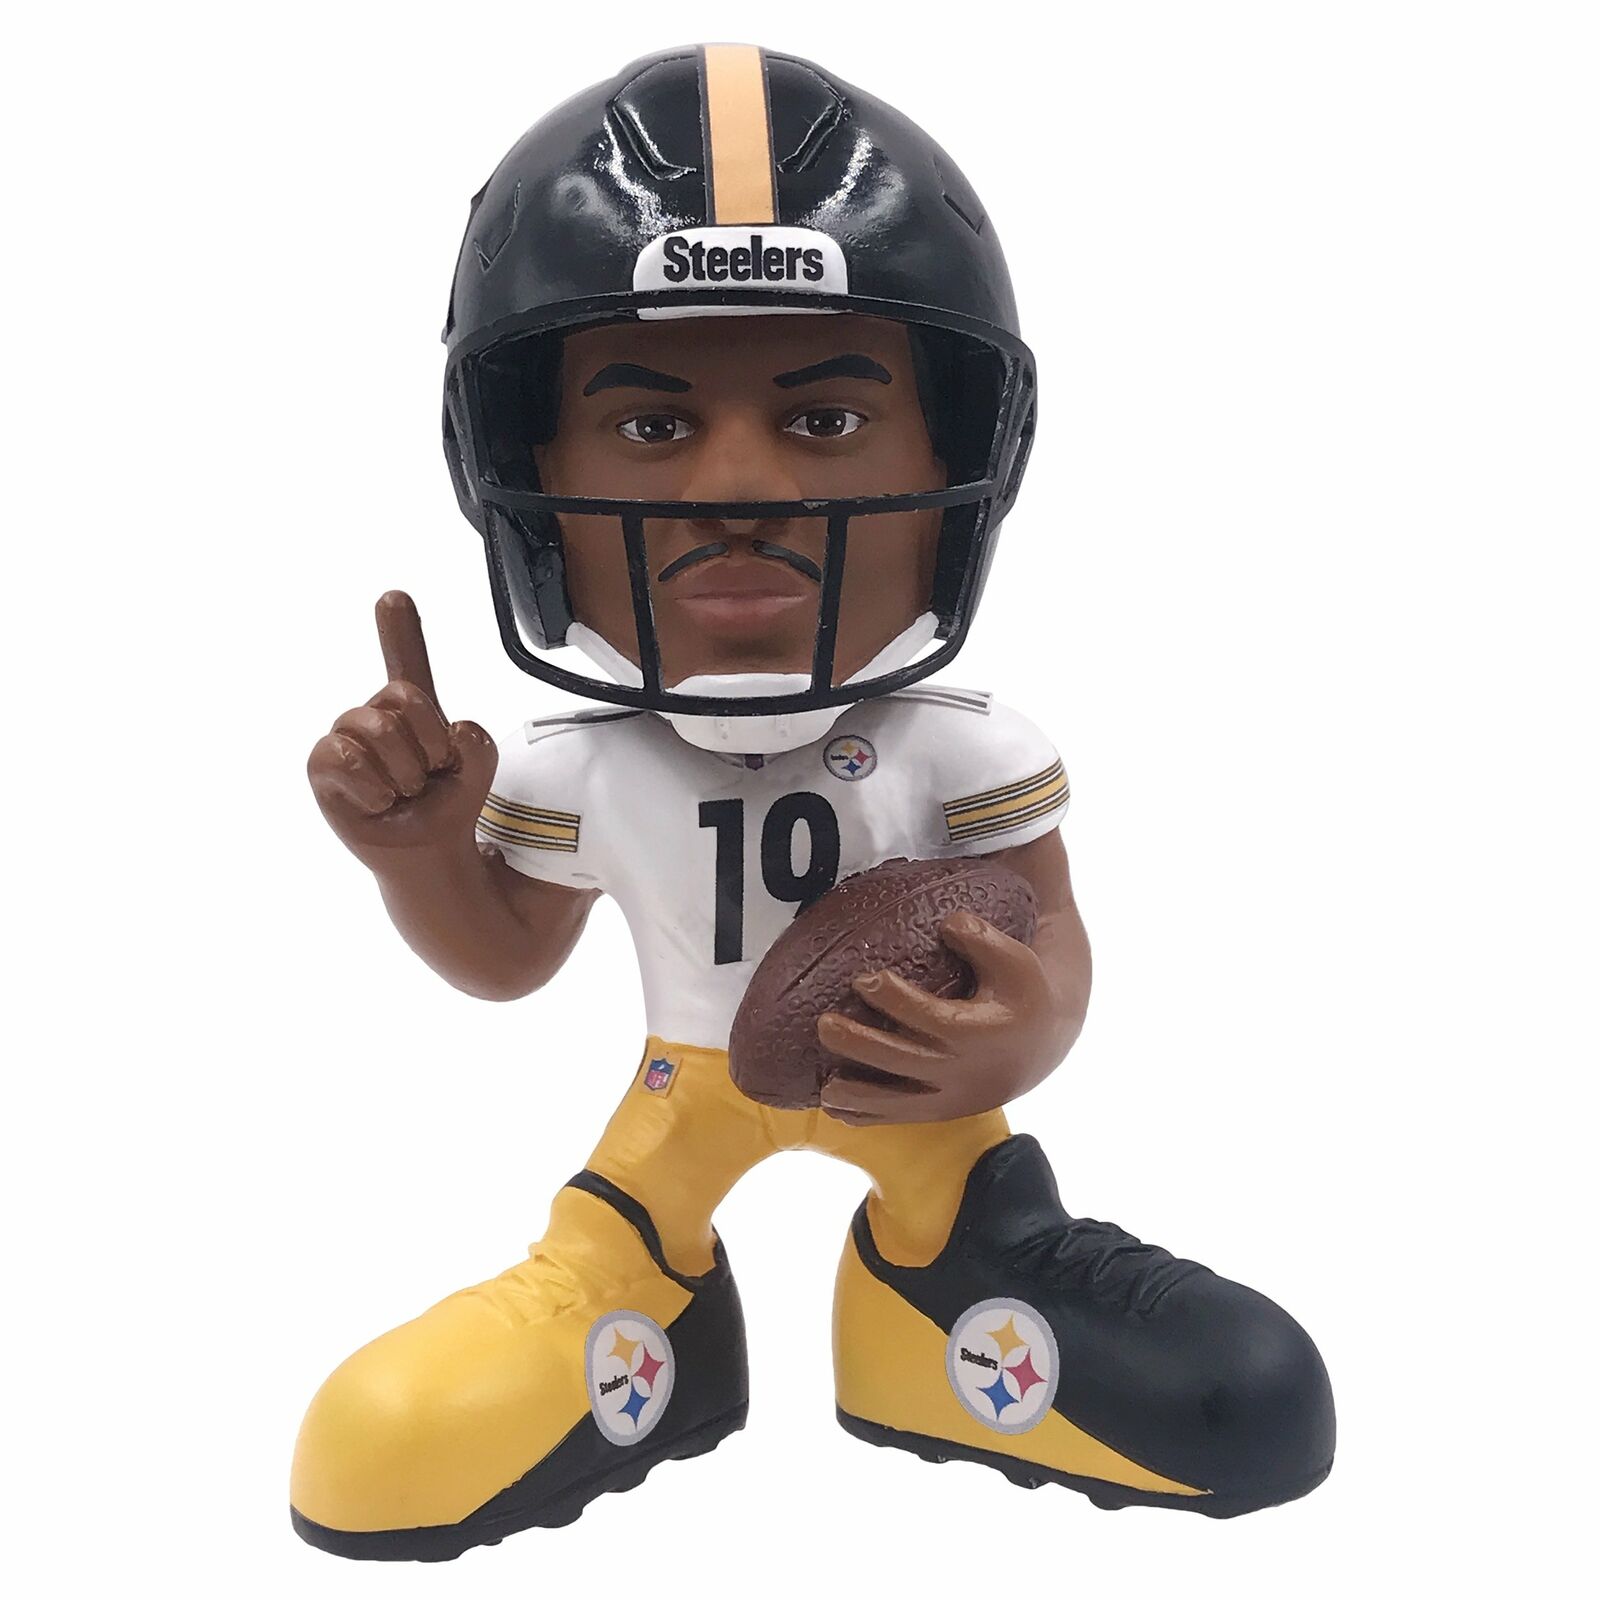 JuJu Smith-Schuster Pittsburgh Steelers Showstomperz 4.5 inch Bobblehead NFL